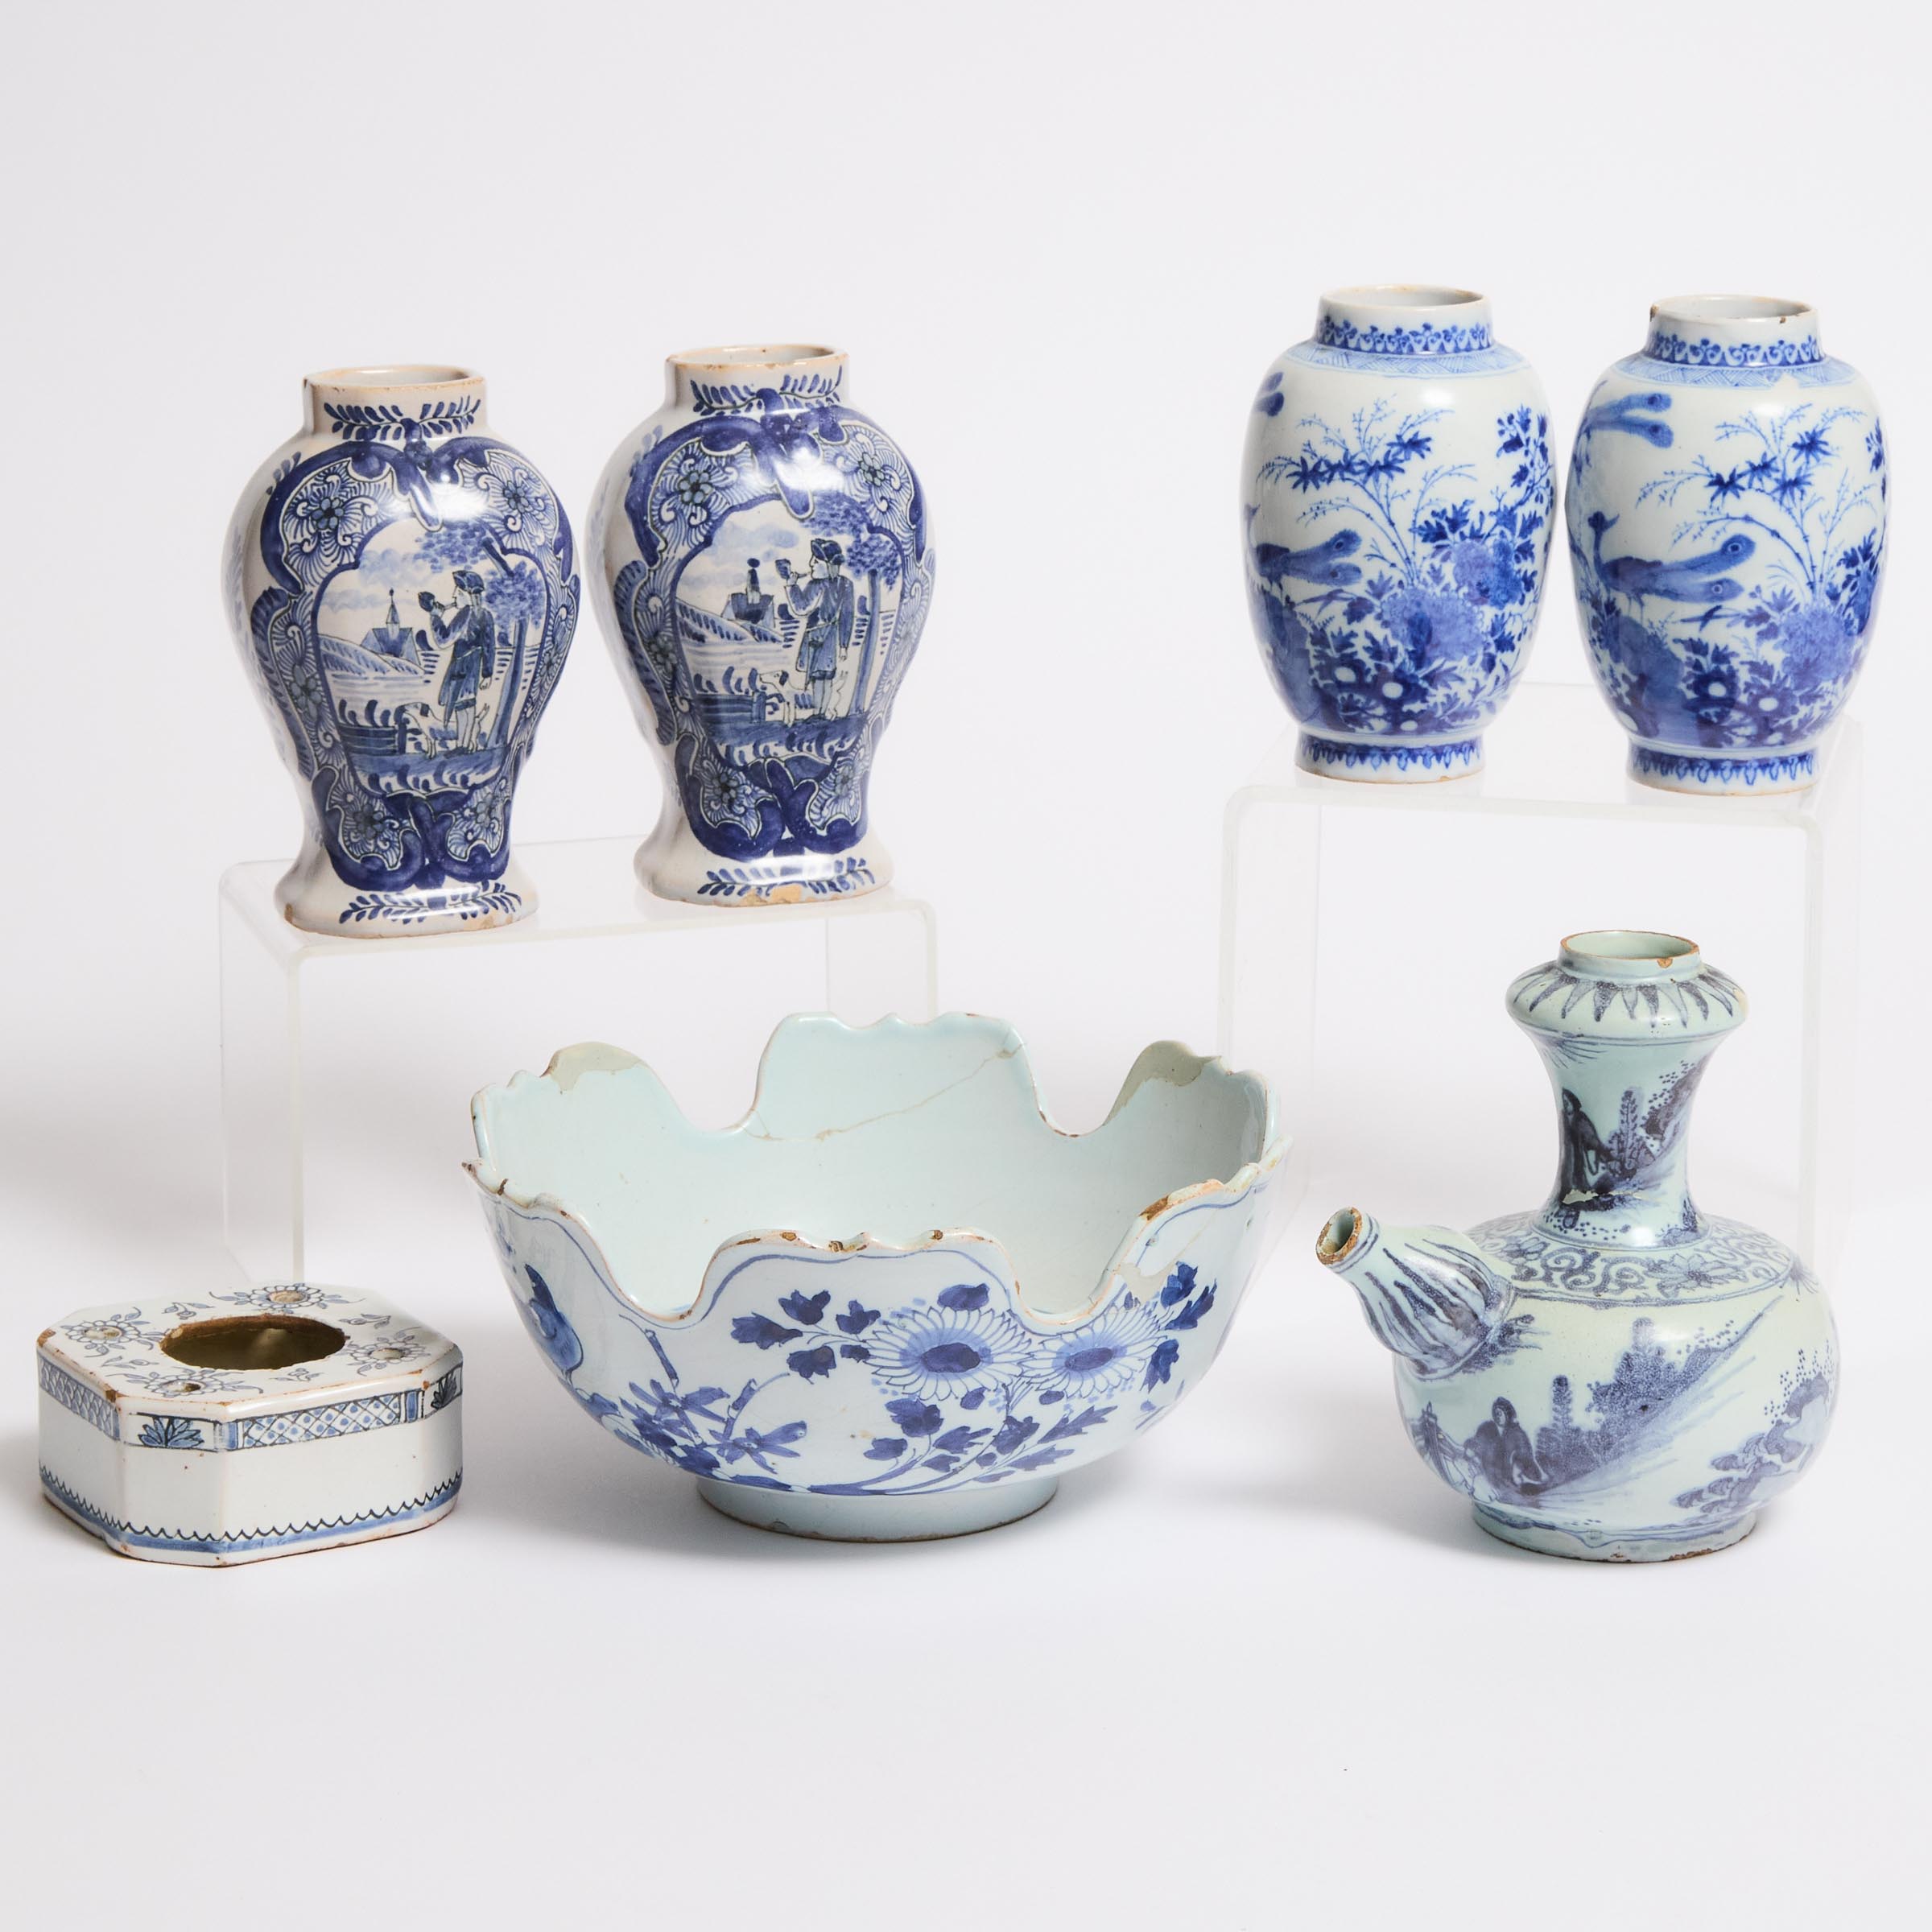 Group of Delft Blue and White Pottery,